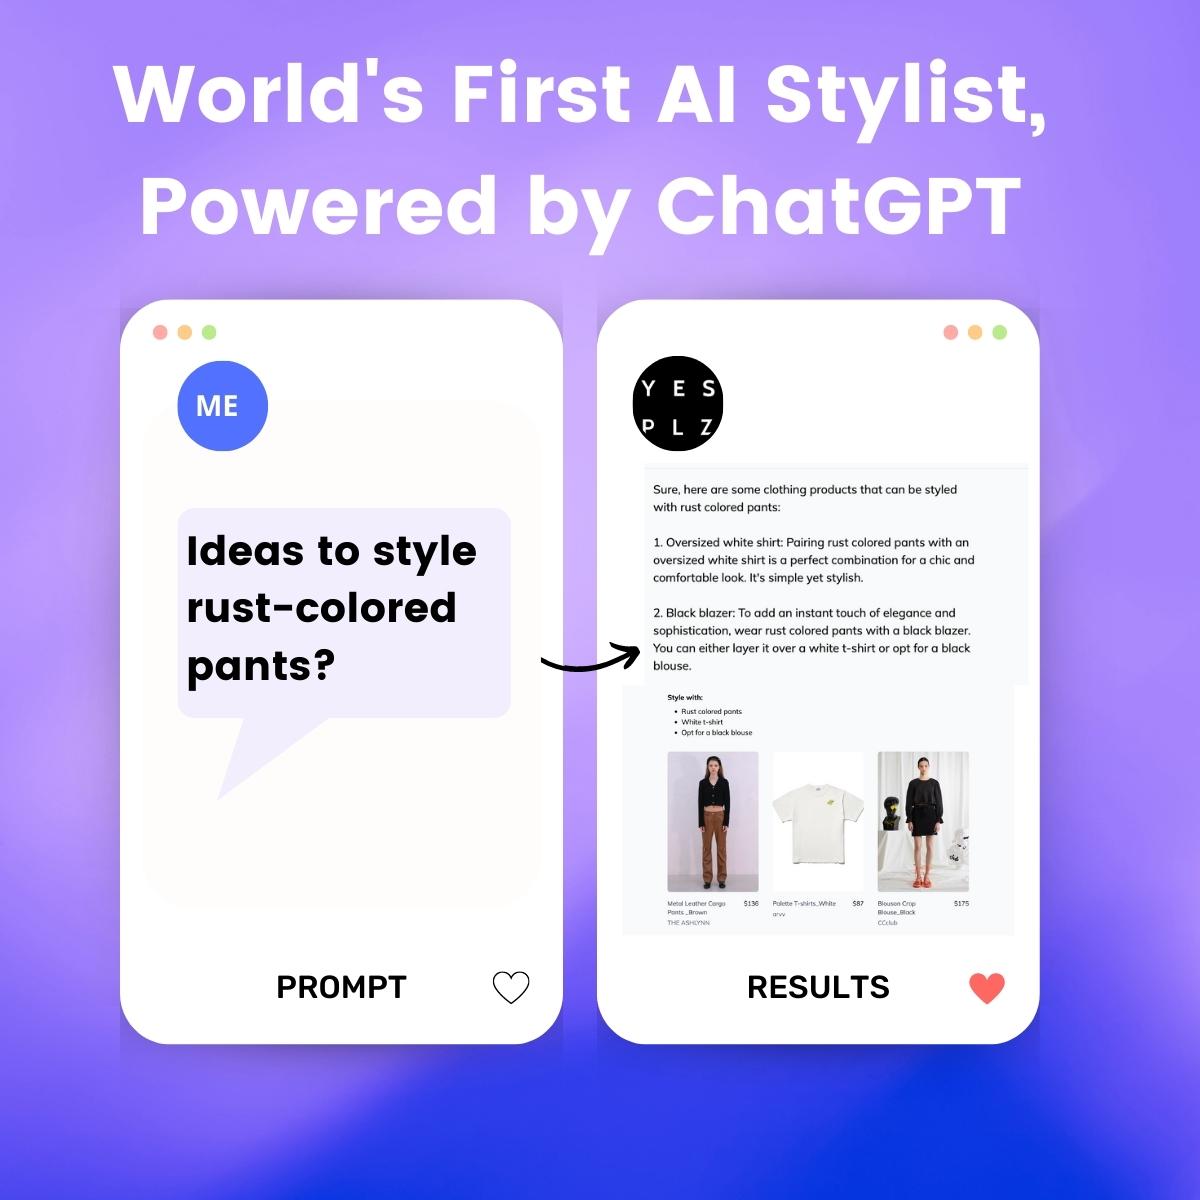 World's first AI Stylist, powered by ChatGPT and fashion AI